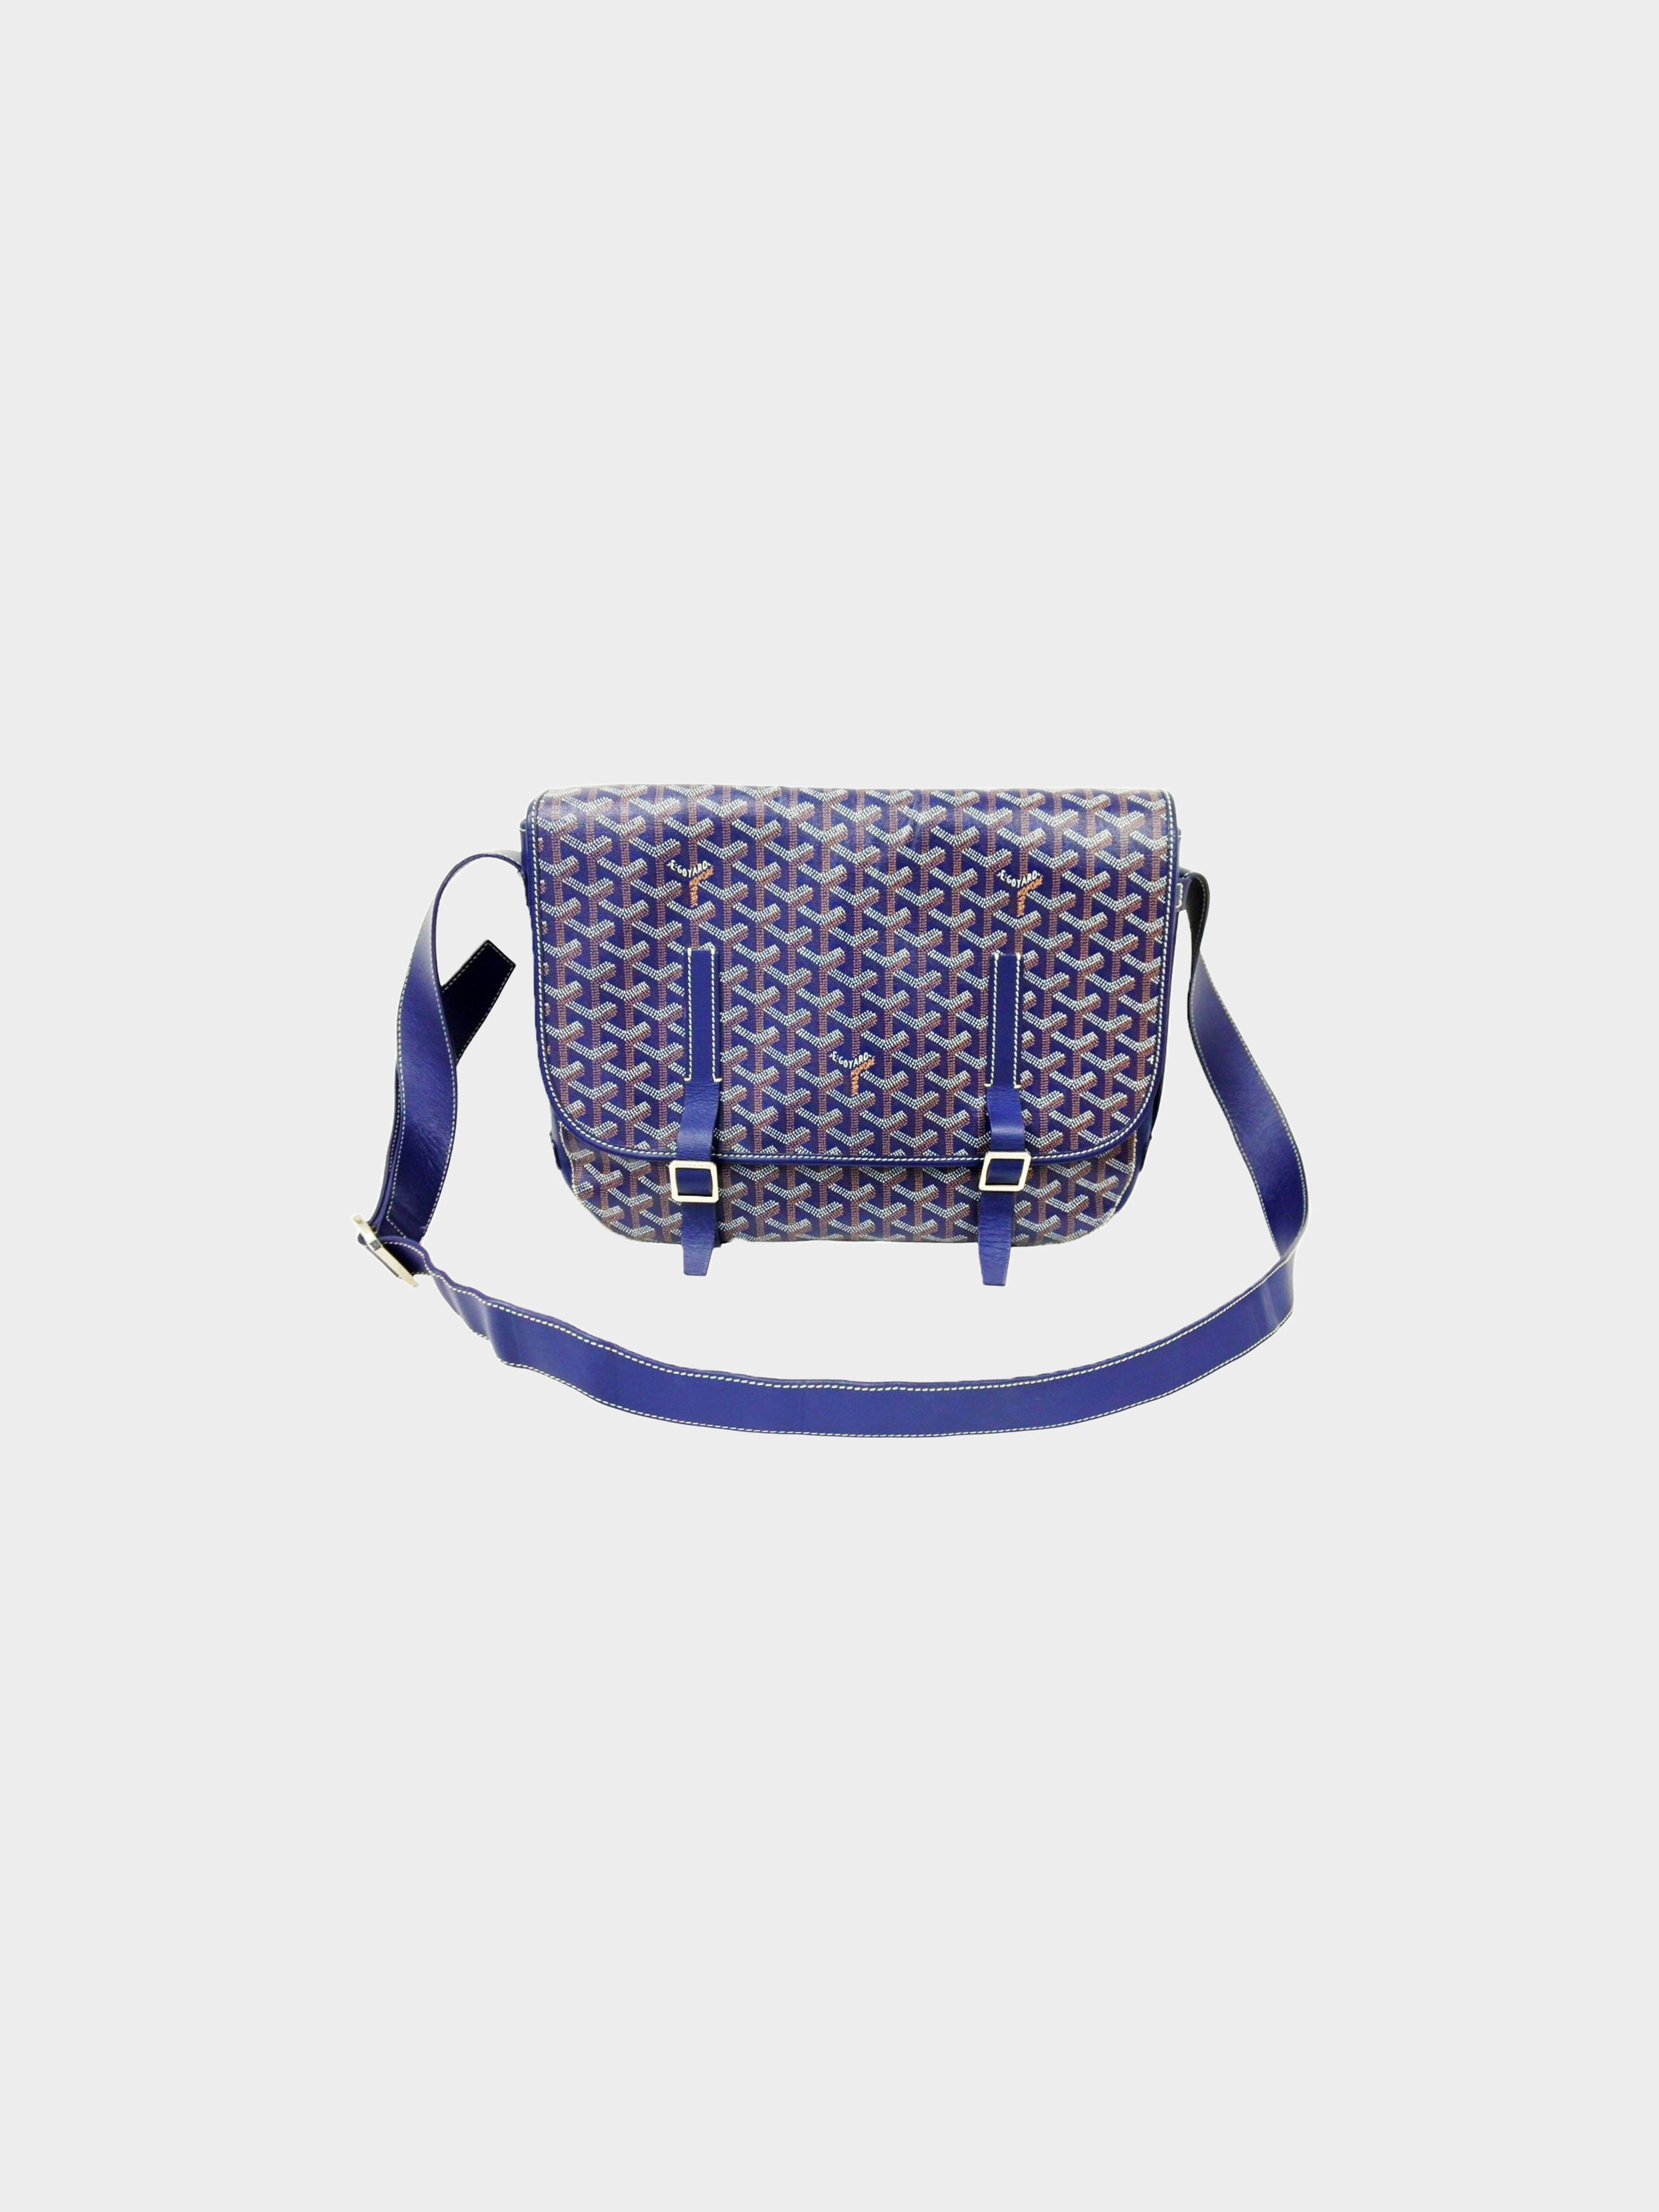 Goyard Cap-Vert PM Bag Jet Black in Canvas/Leather with Silver